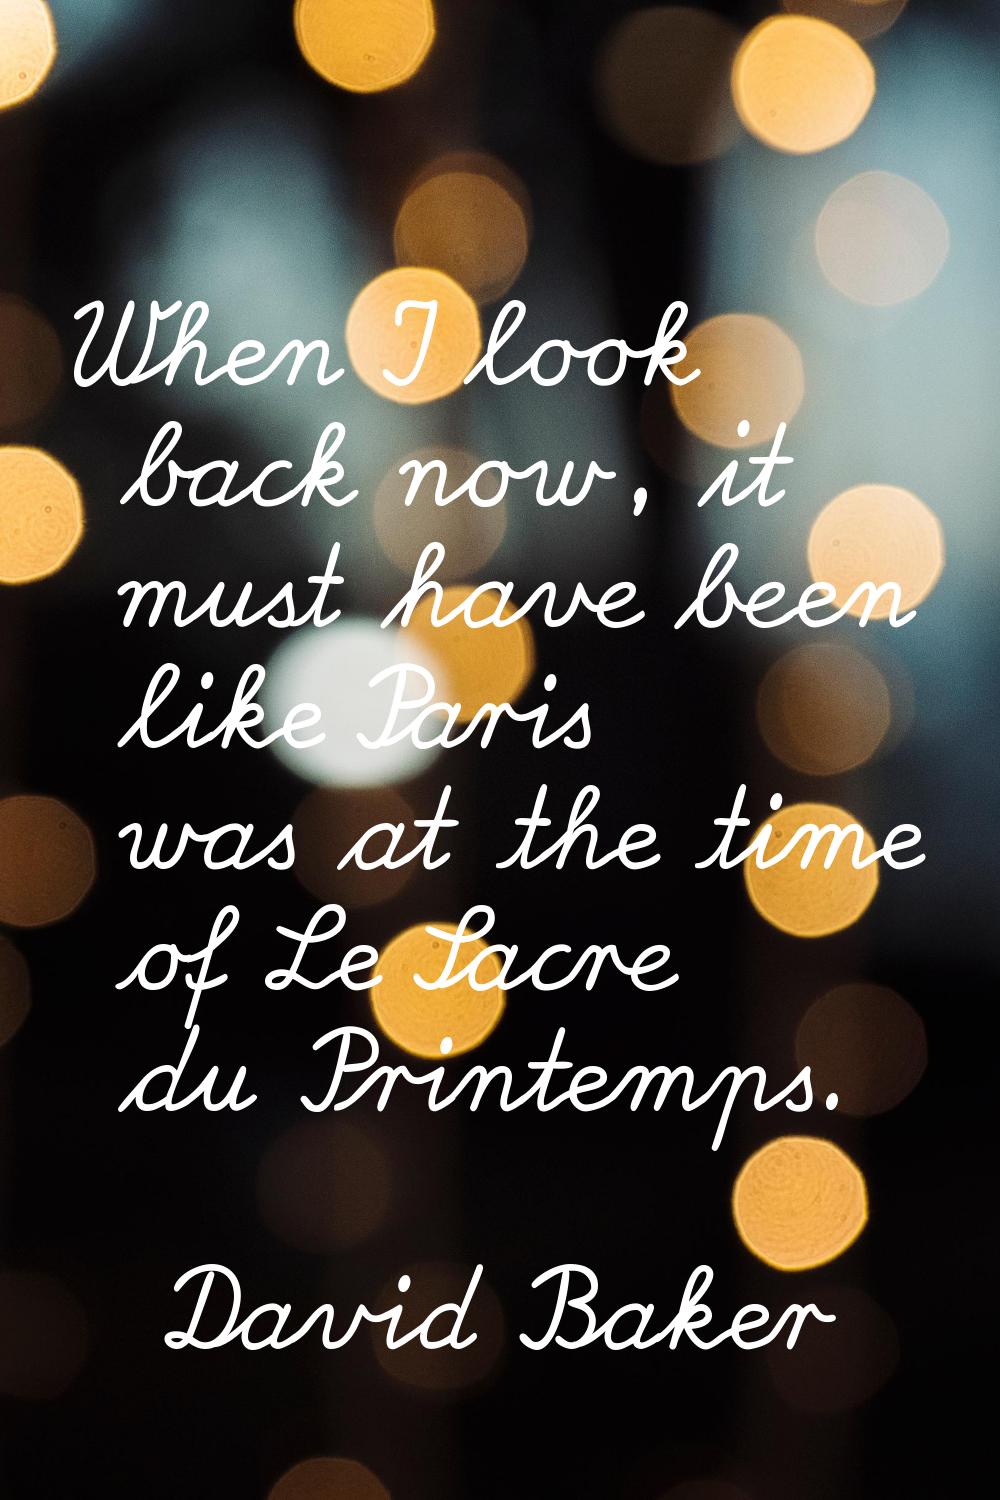 When I look back now, it must have been like Paris was at the time of Le Sacre du Printemps.